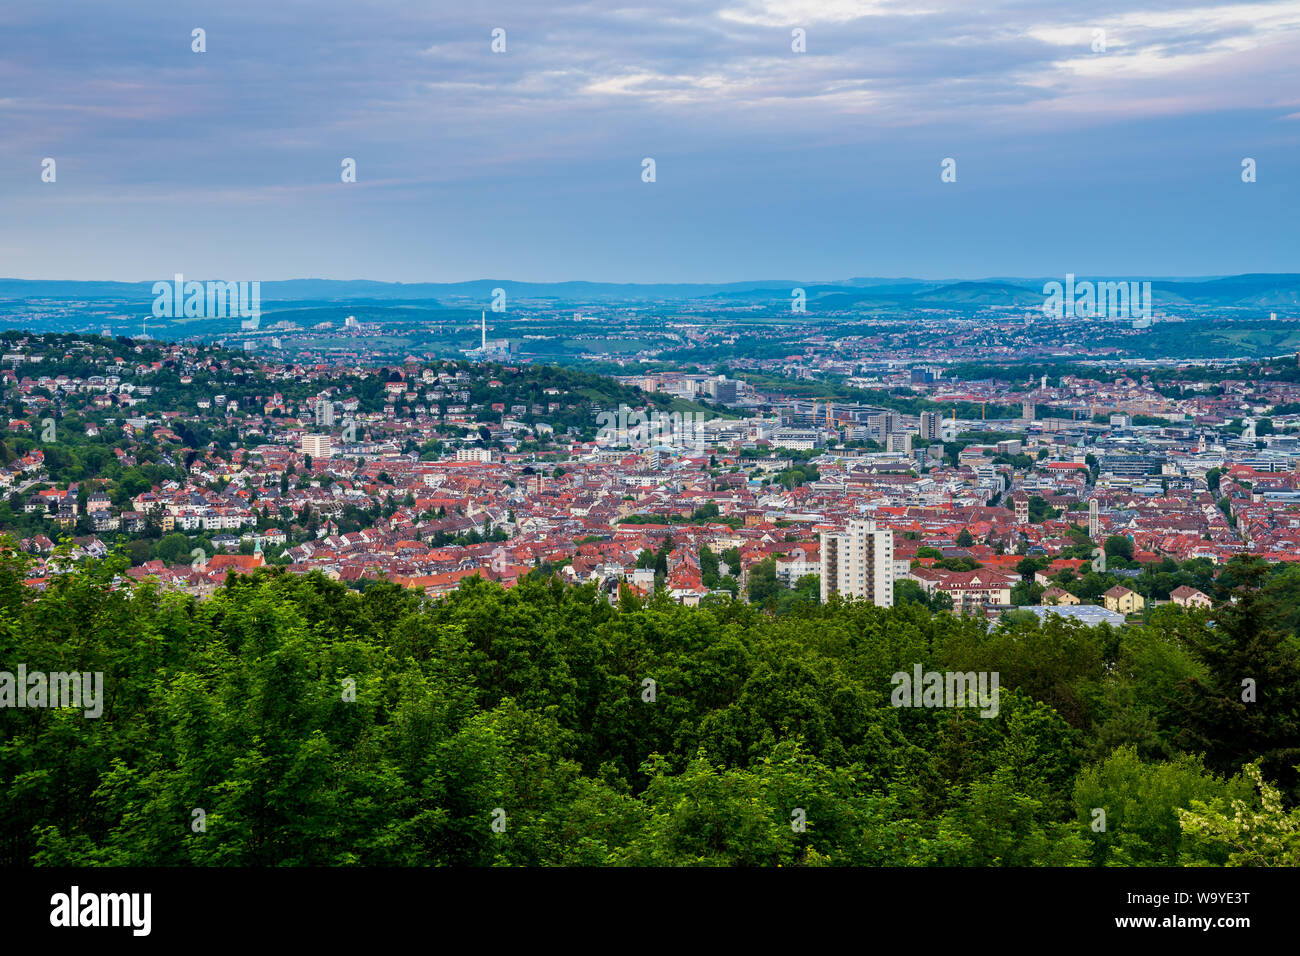 Germany, Houses of city stuttgart in valley surrounded by many hills and mountains forested with green trees in beautiful nature landscape Stock Photo